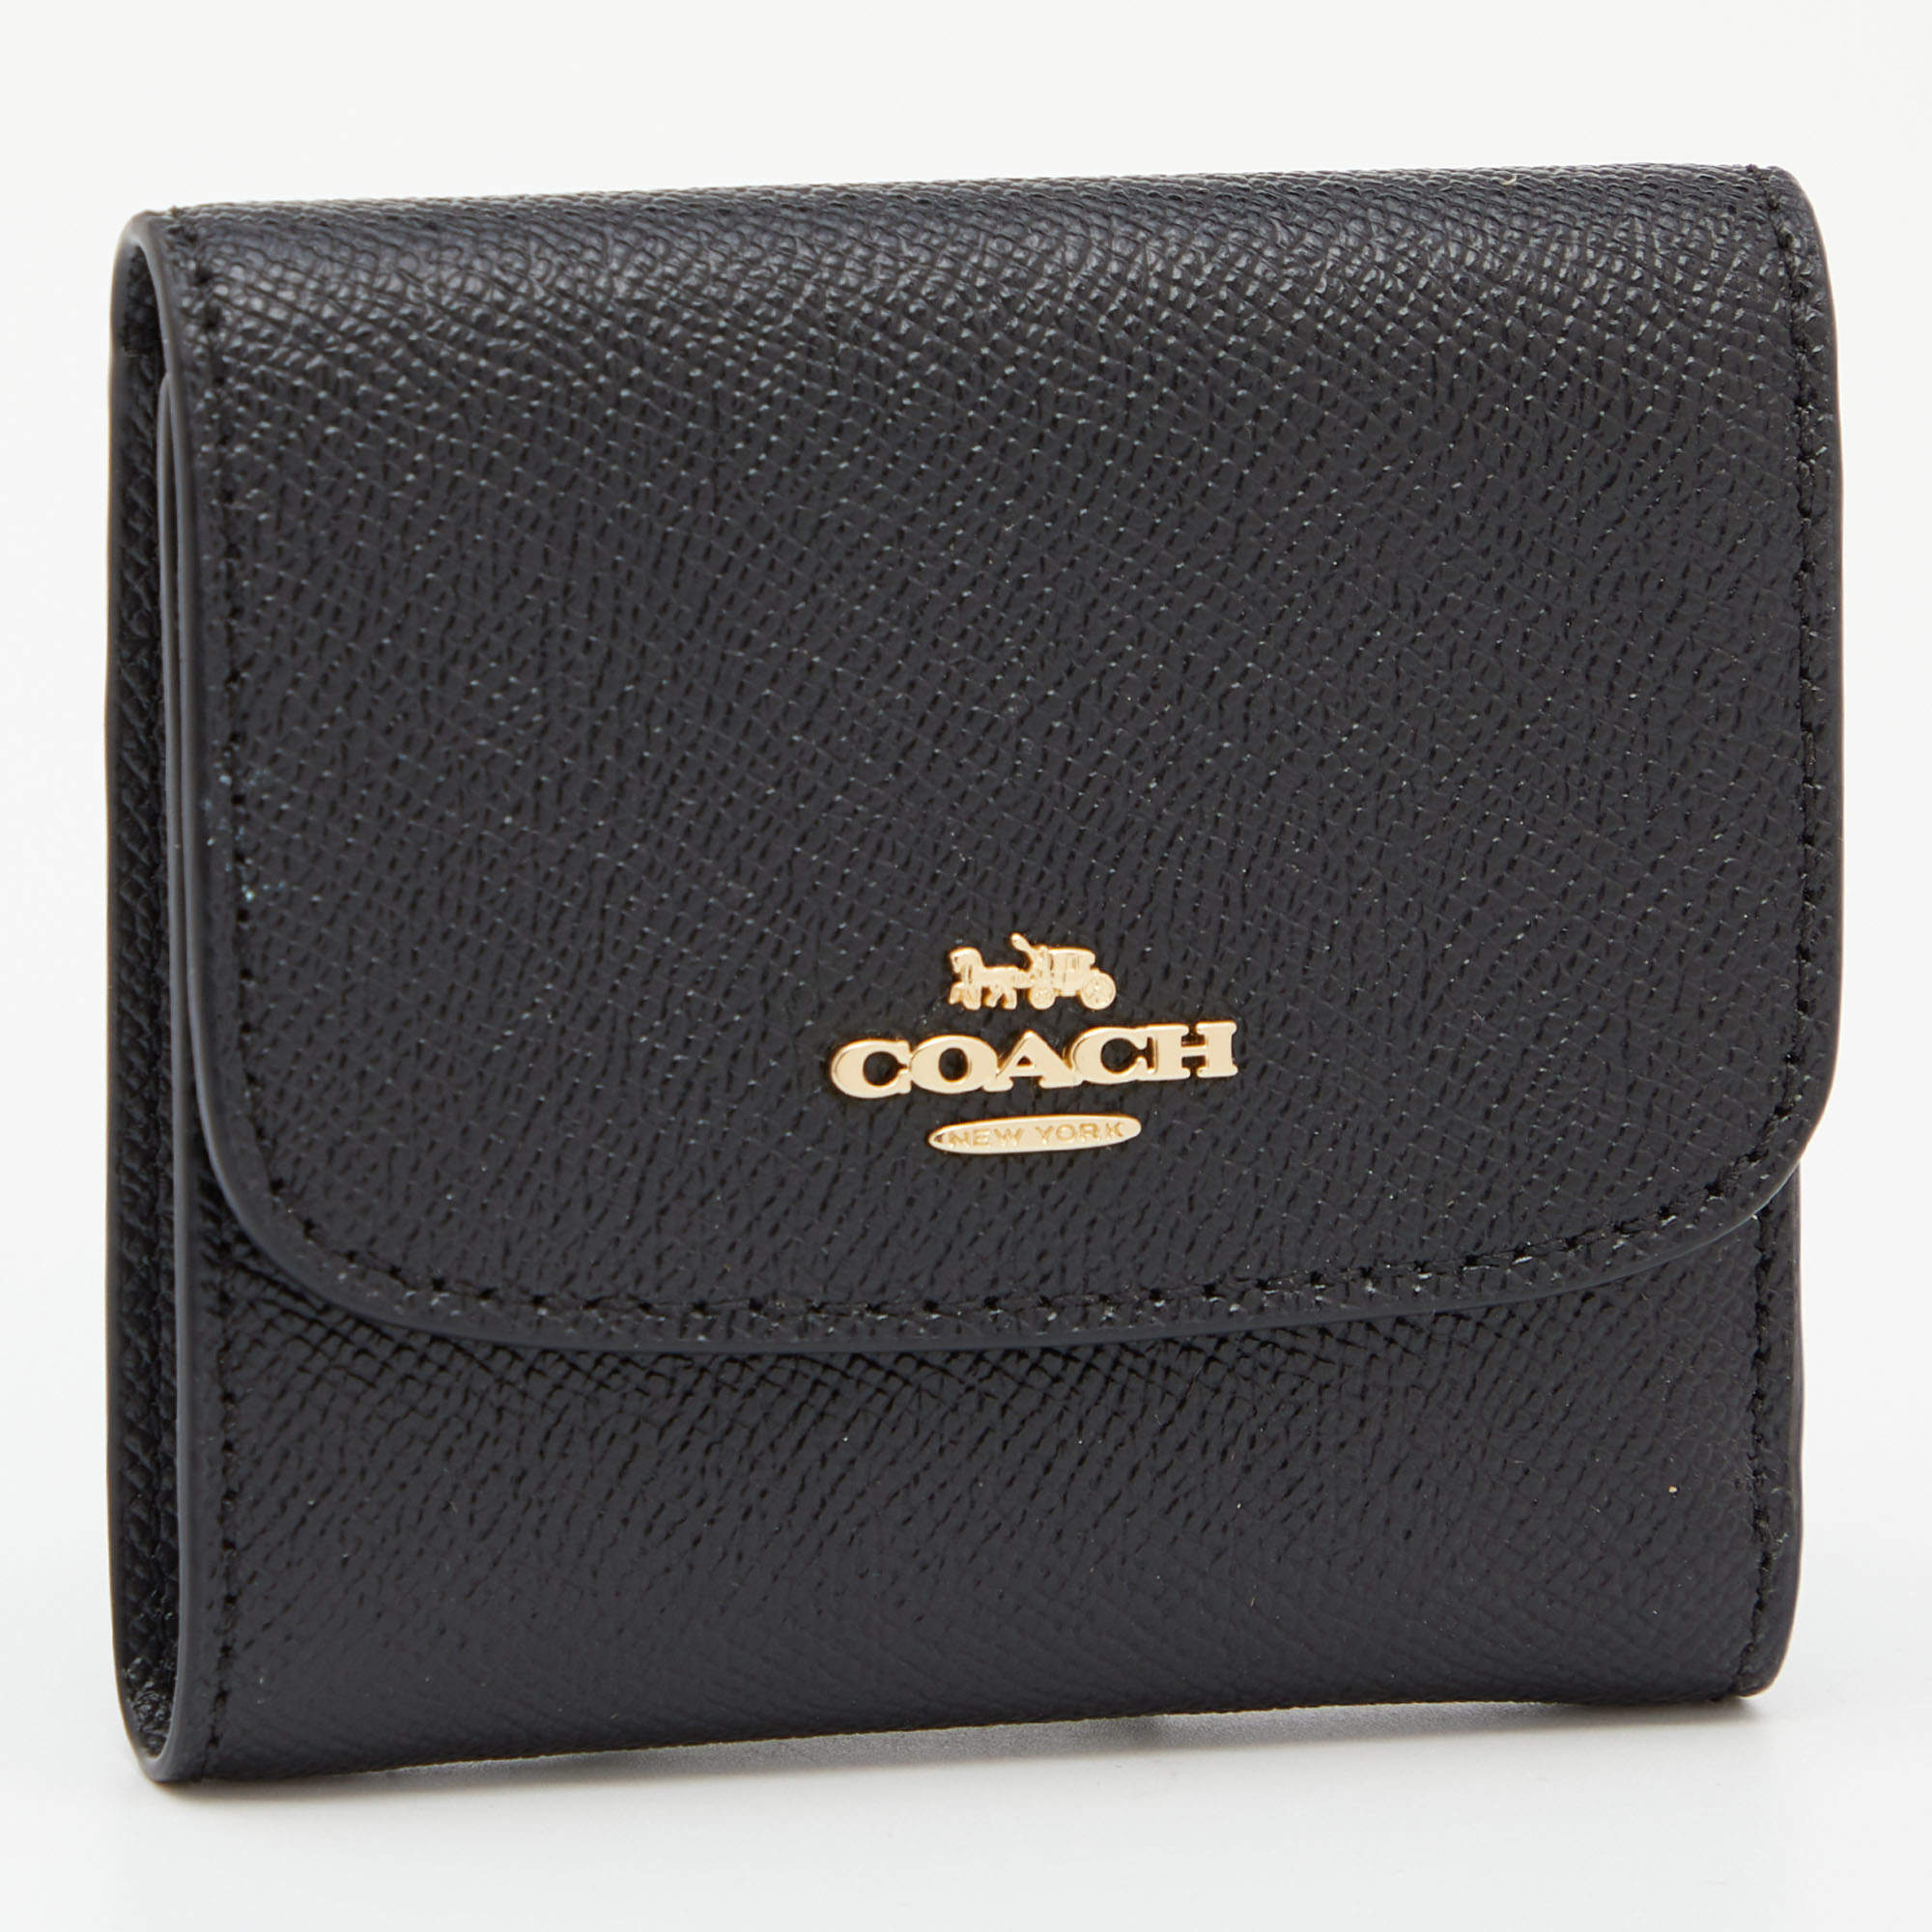 Coach Women's Wallet Leather Card Zipper Black Hand Bag Small Branded